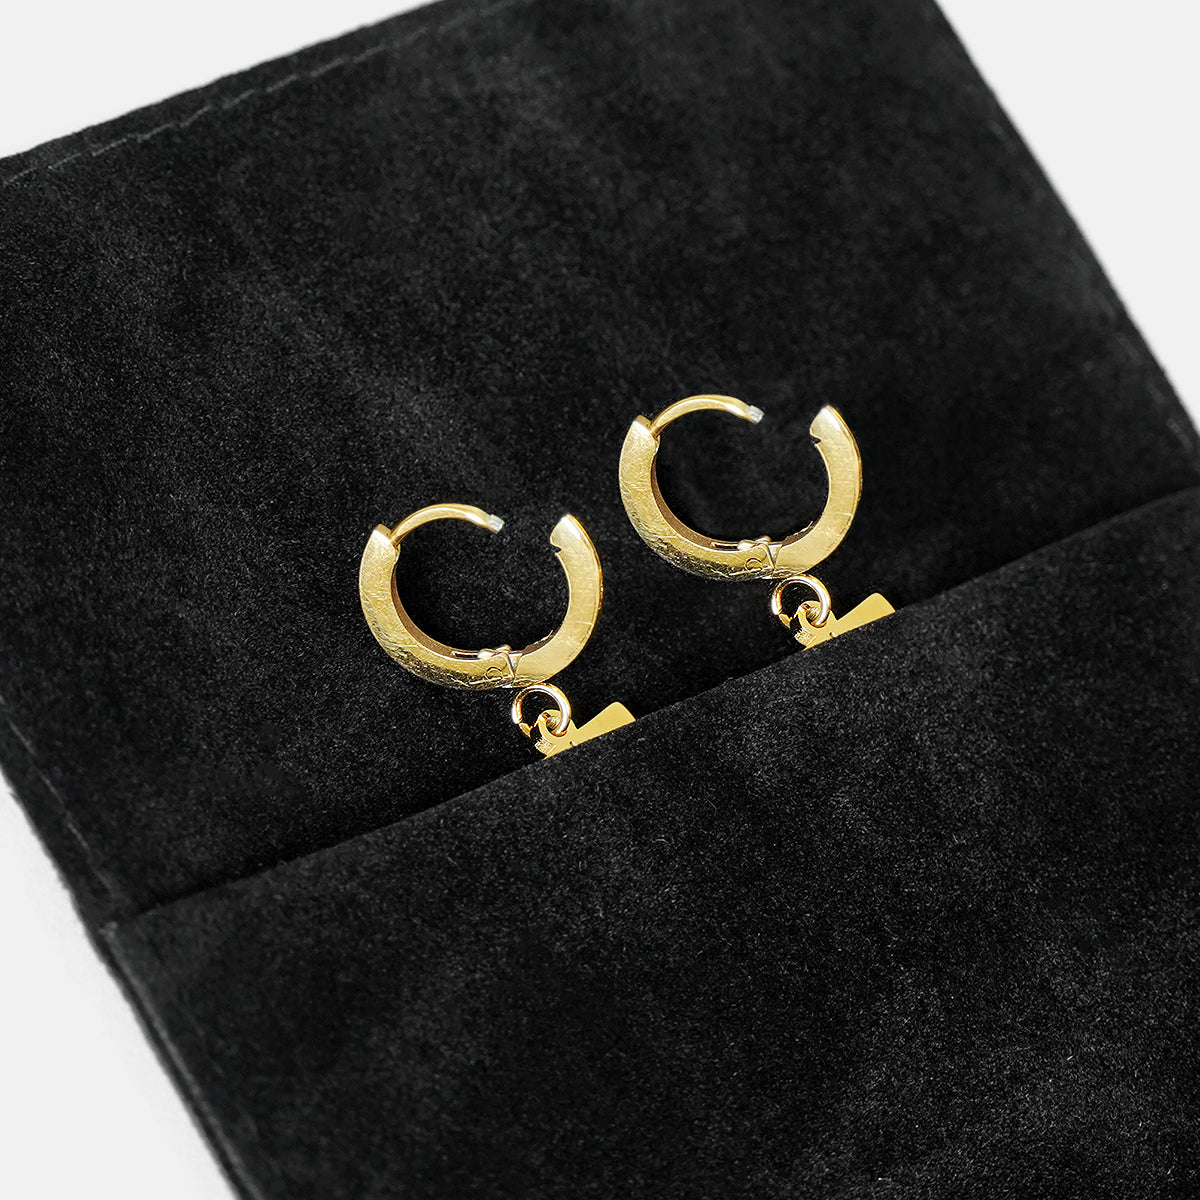 82 Number Earring - Gold Plated Stainless Steel